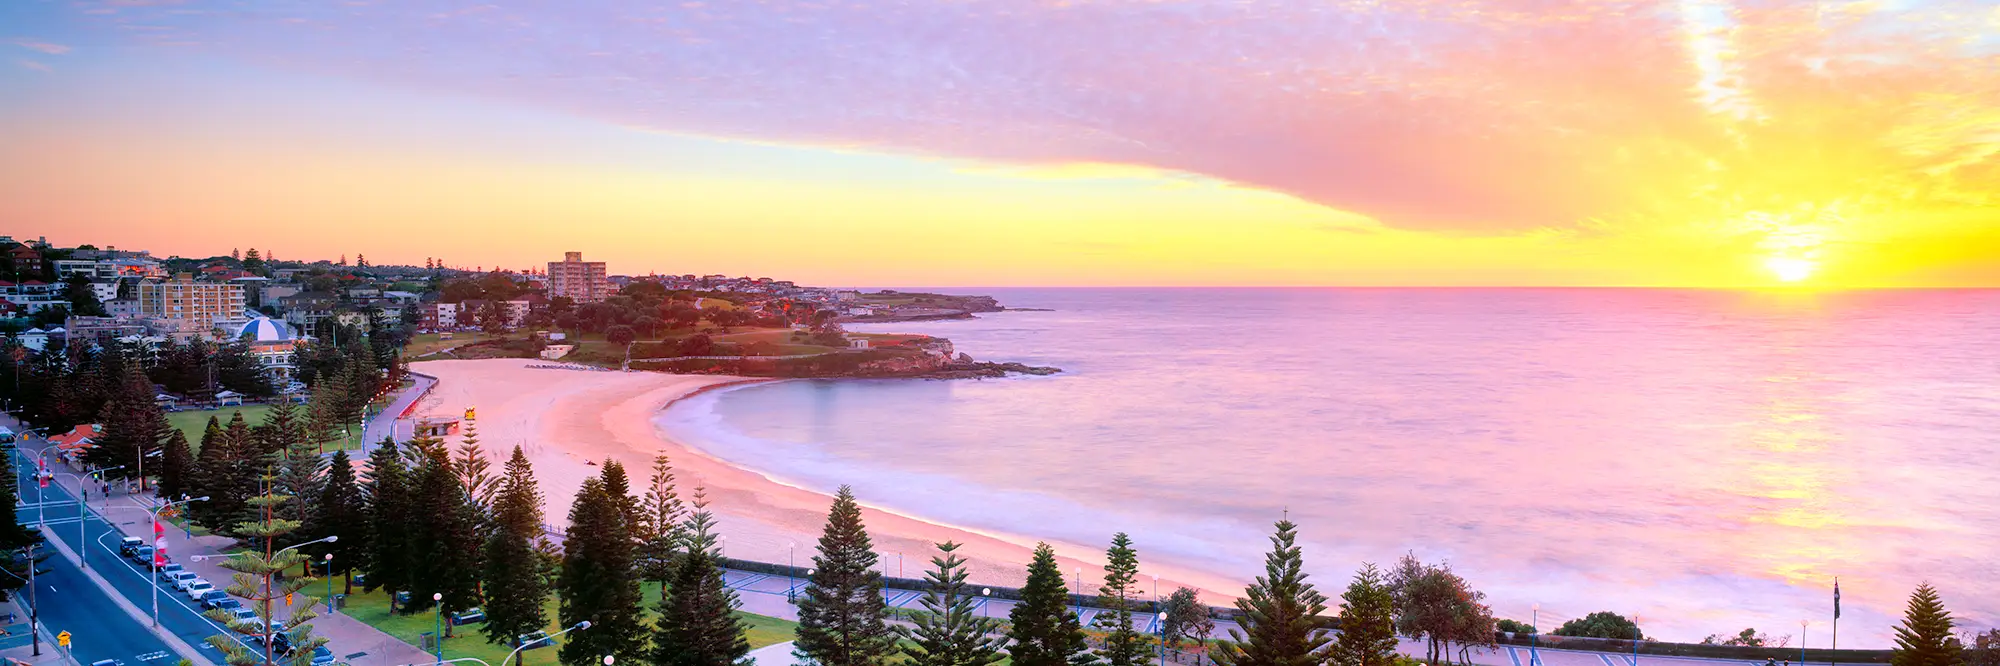 Coogee Beach Red Sunrise Panoramic Landscape Canvas Art Work Prints